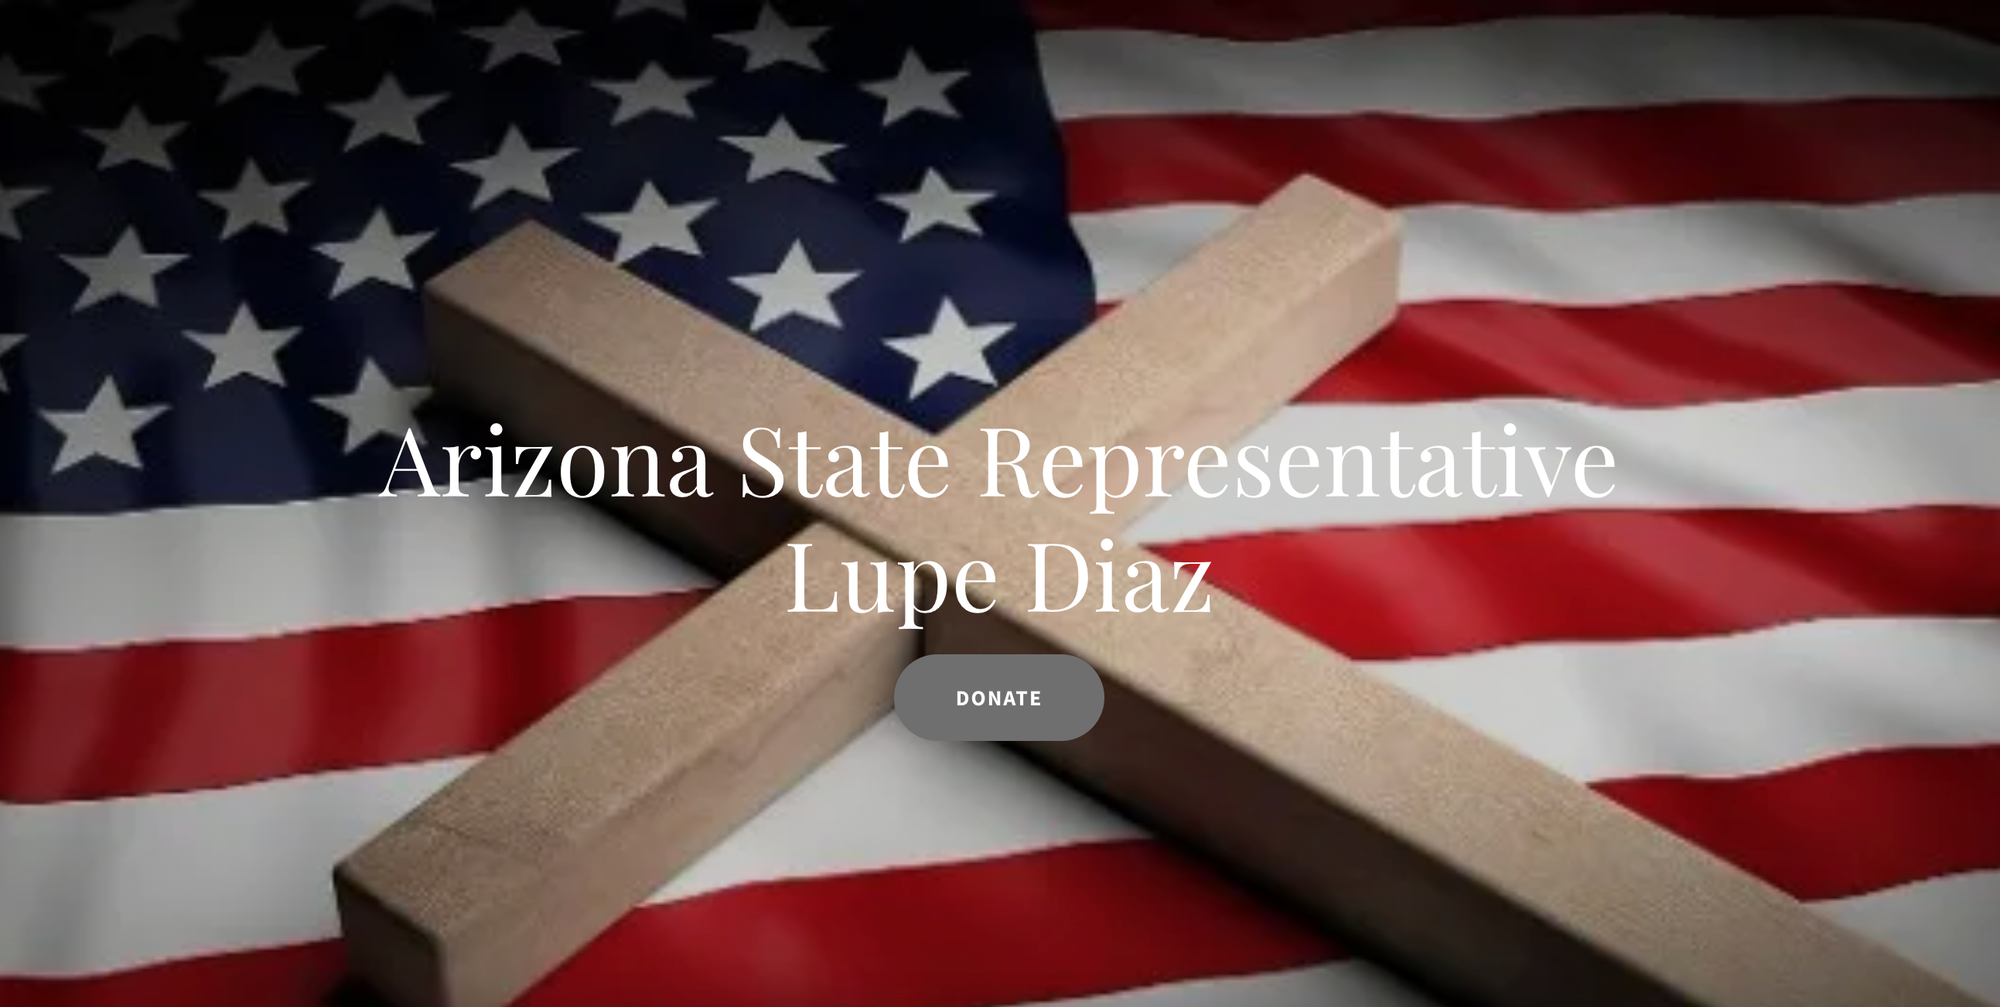 AZ state representative calls nation "unrighteous" because of LGBTQ+ people and non-Christians.